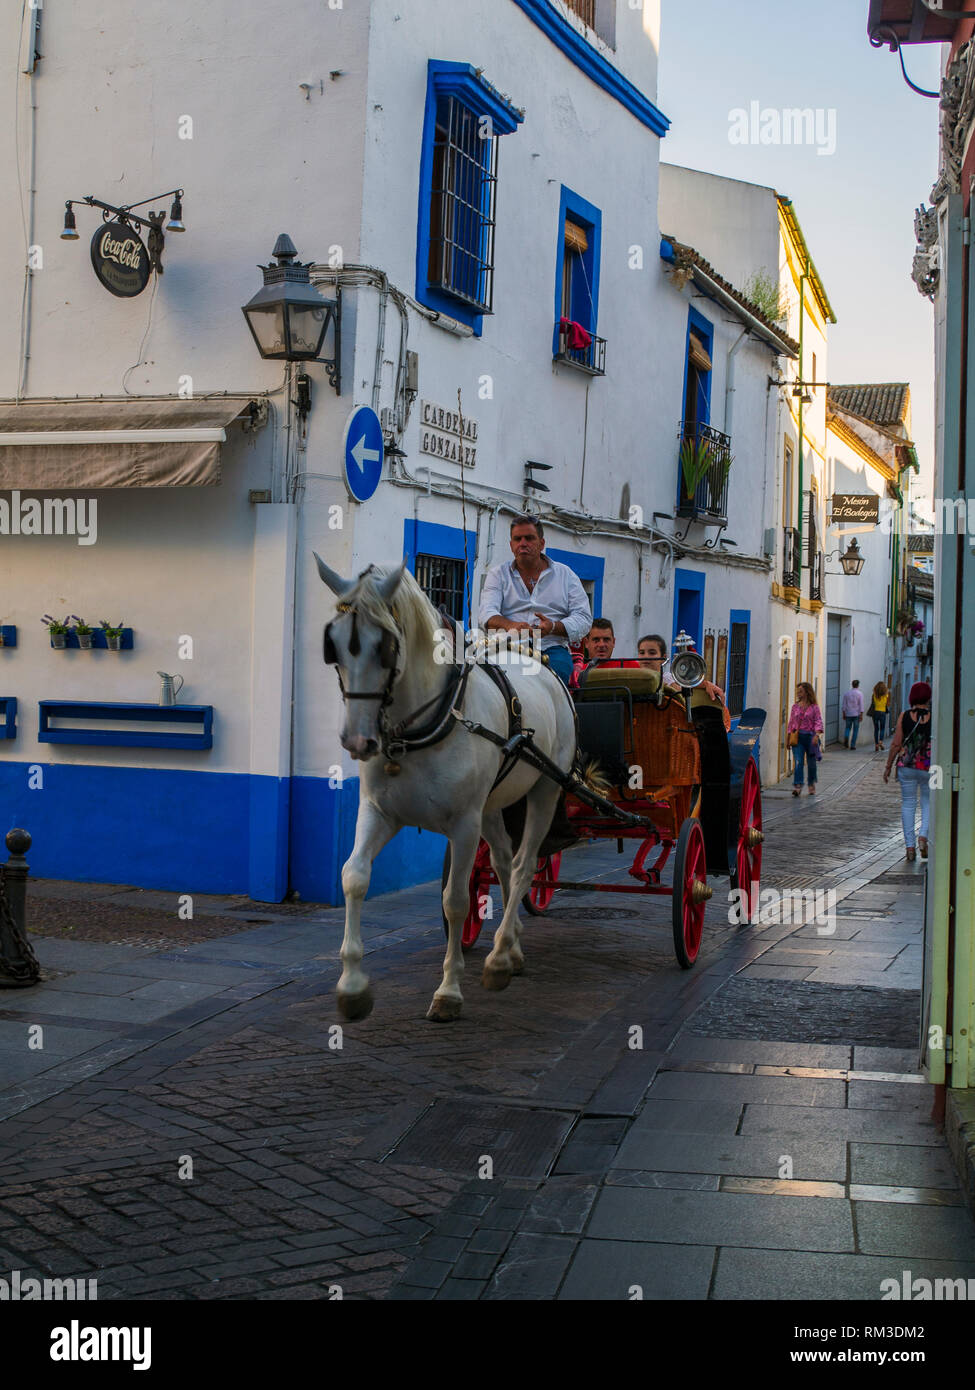 A horse and cart take tourists for for rides through the old streets of Cordoba, Spain. Stock Photo